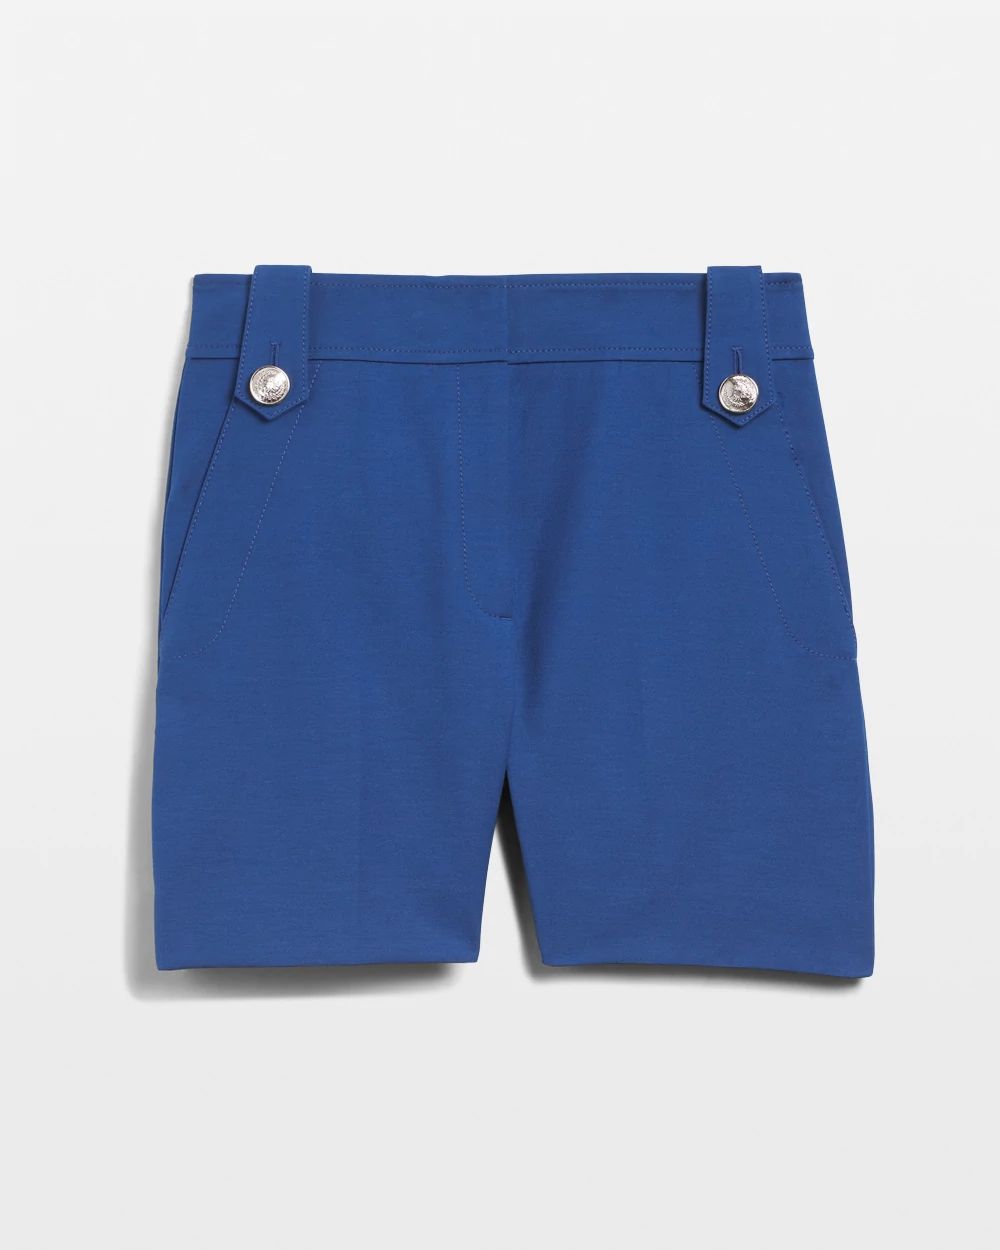 High-Rise Lightweight Button Comfort Stretch Shorts click to view larger image.